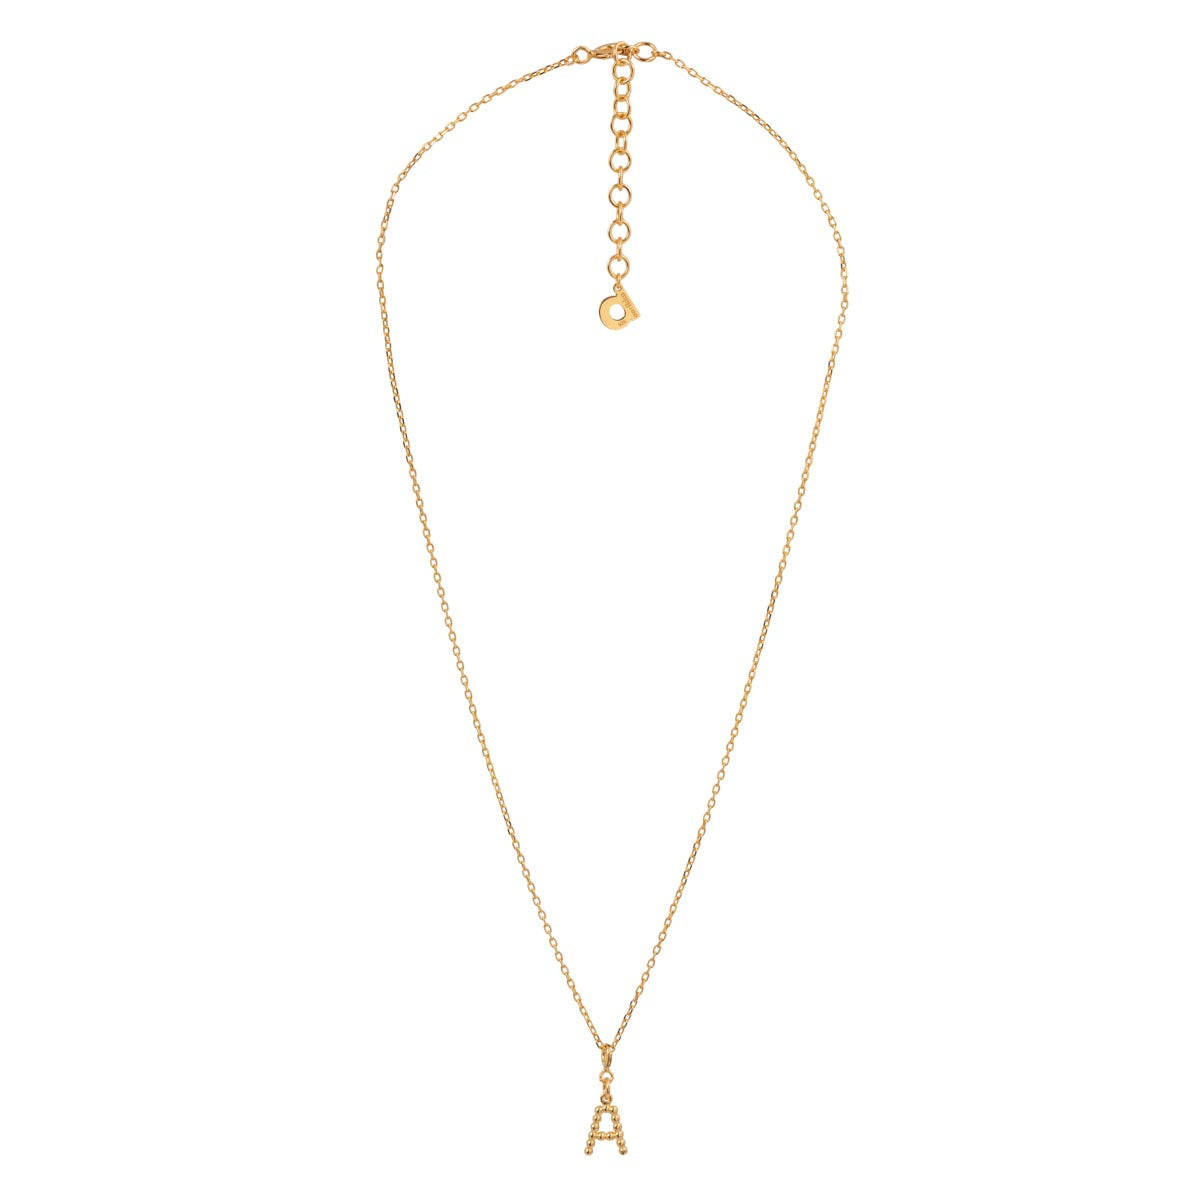 Yllätys Monogram Necklace A, gold-plated silver